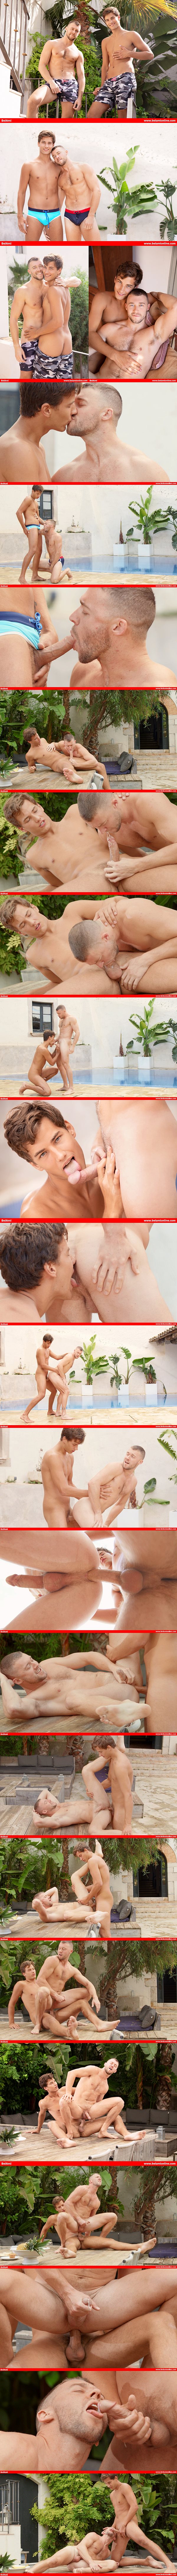 Belamionline - Blond dude Tom Houston barebacks Justin's bubble ass by the pool before he fucks the cum out of Justin and dumps his load in Justin's mouth 02